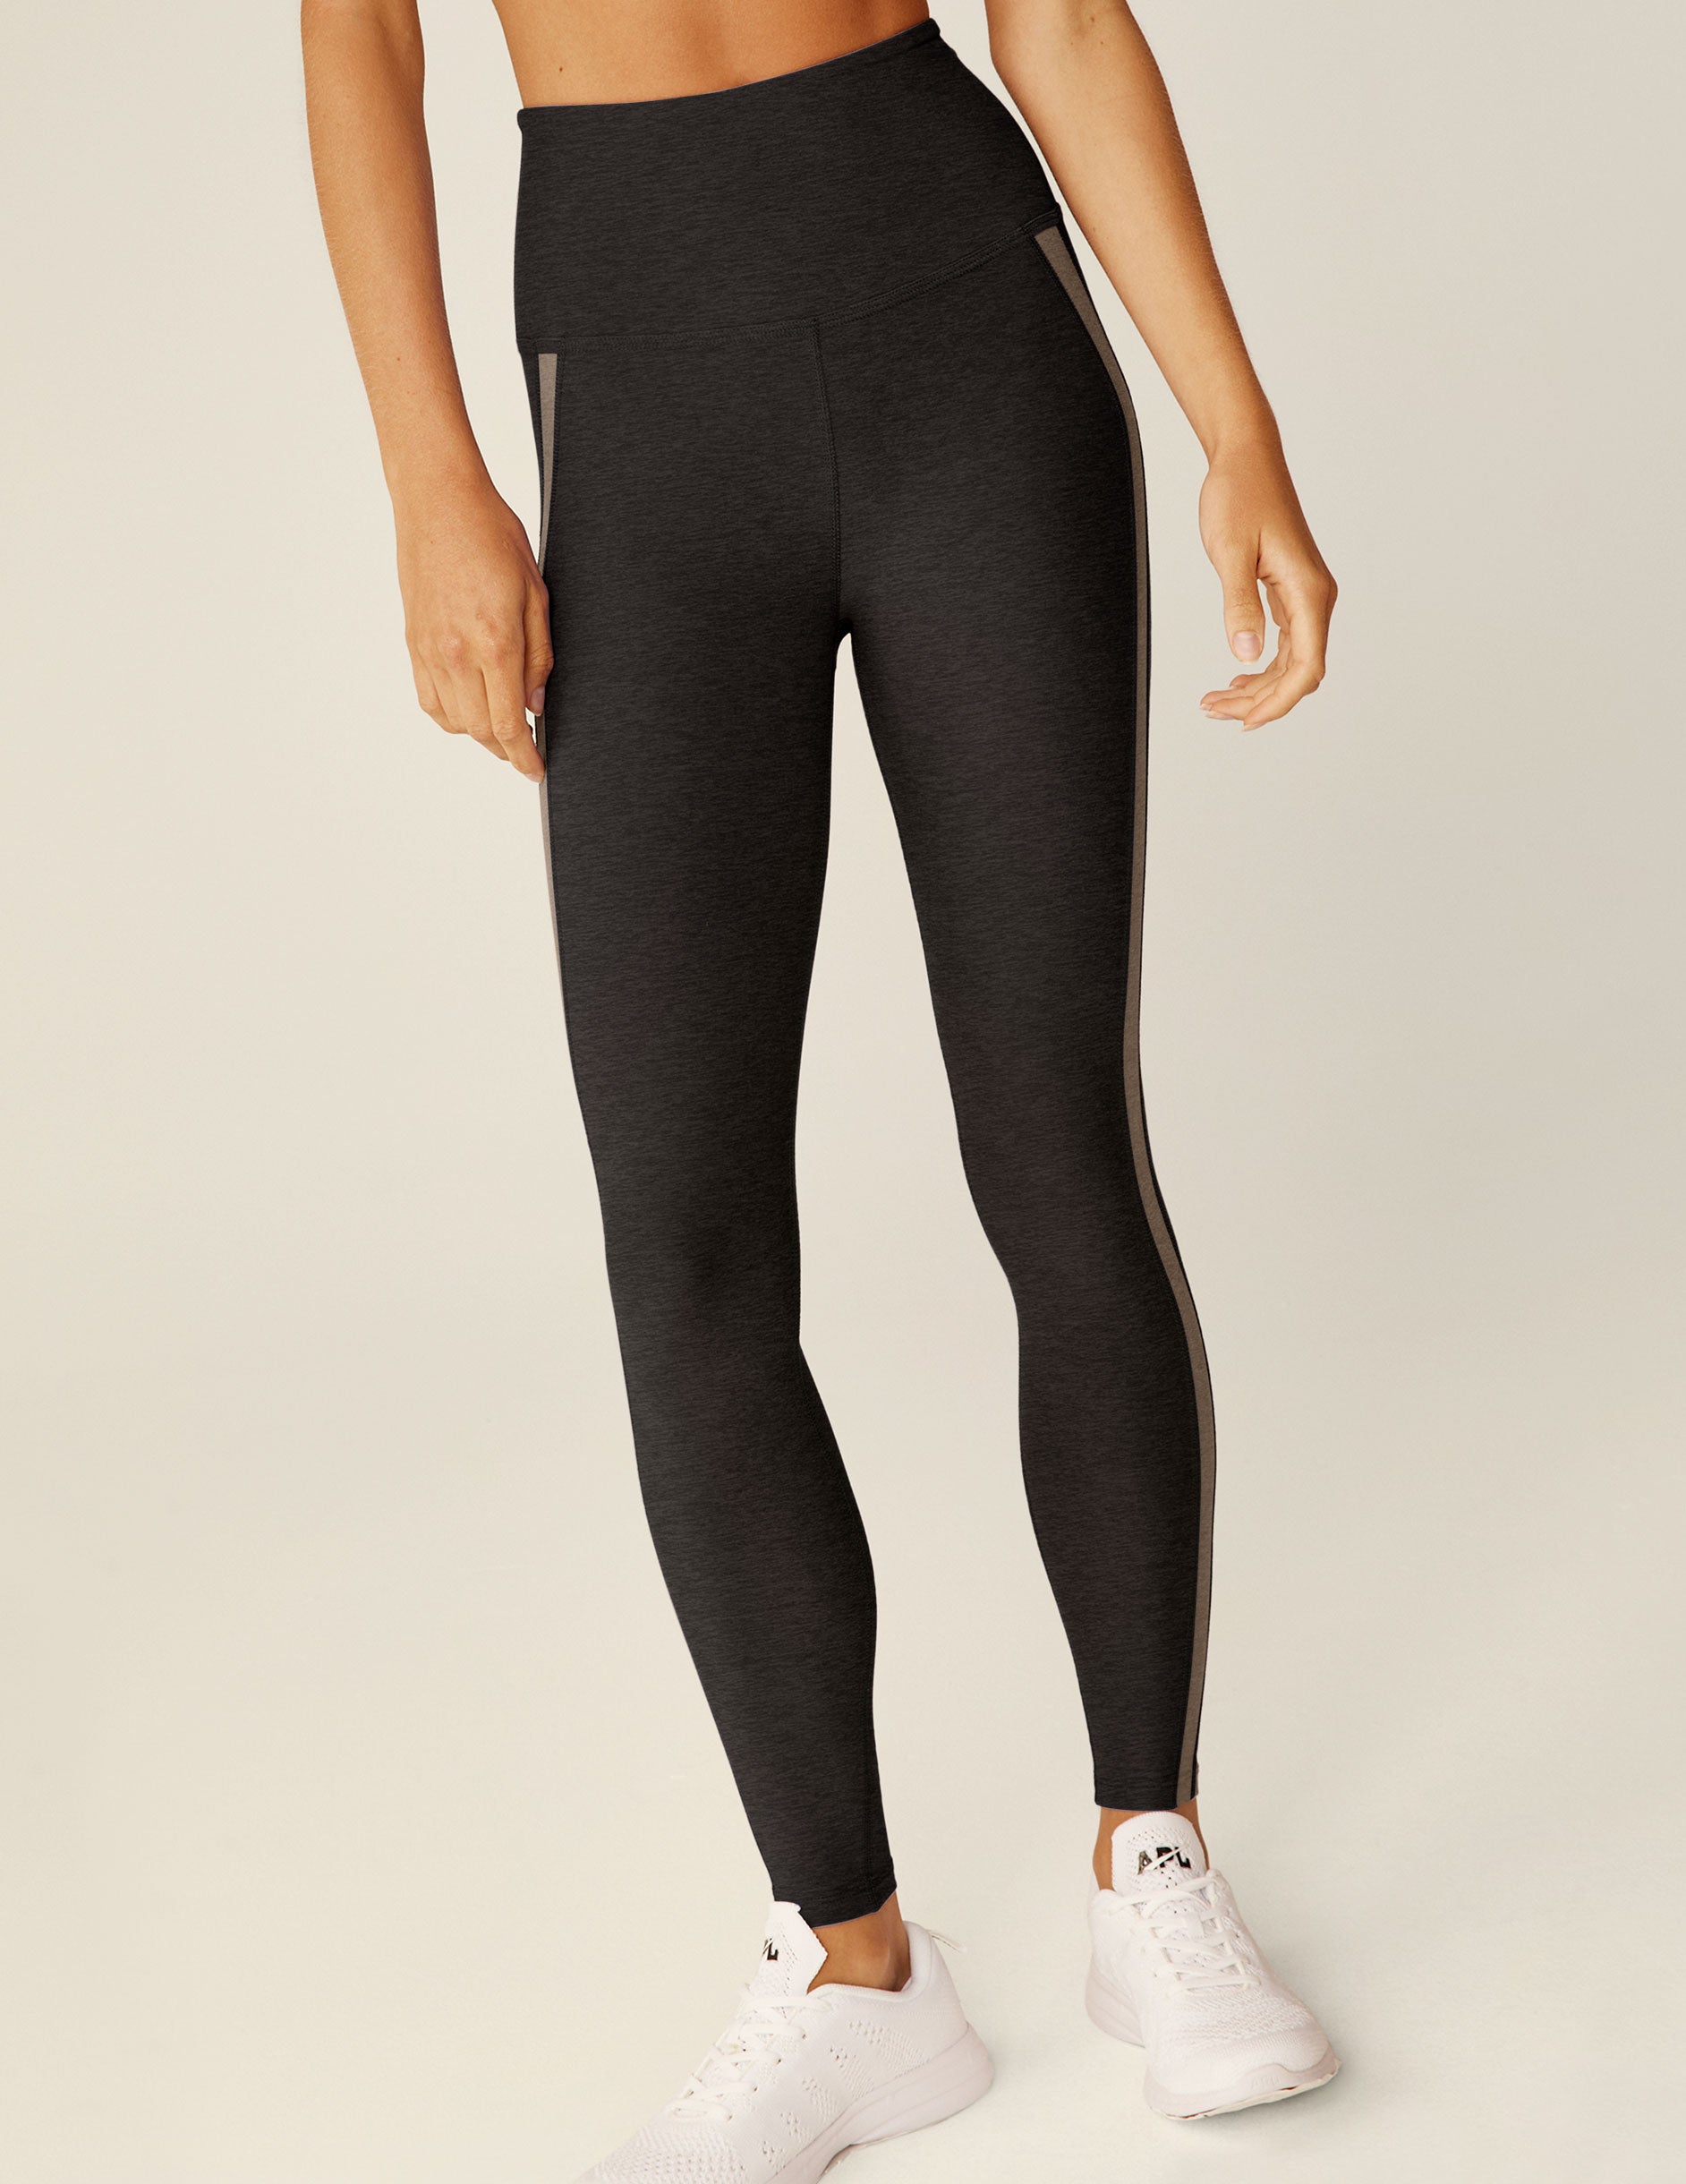 black high-waisted midi leggings with brown lining. 